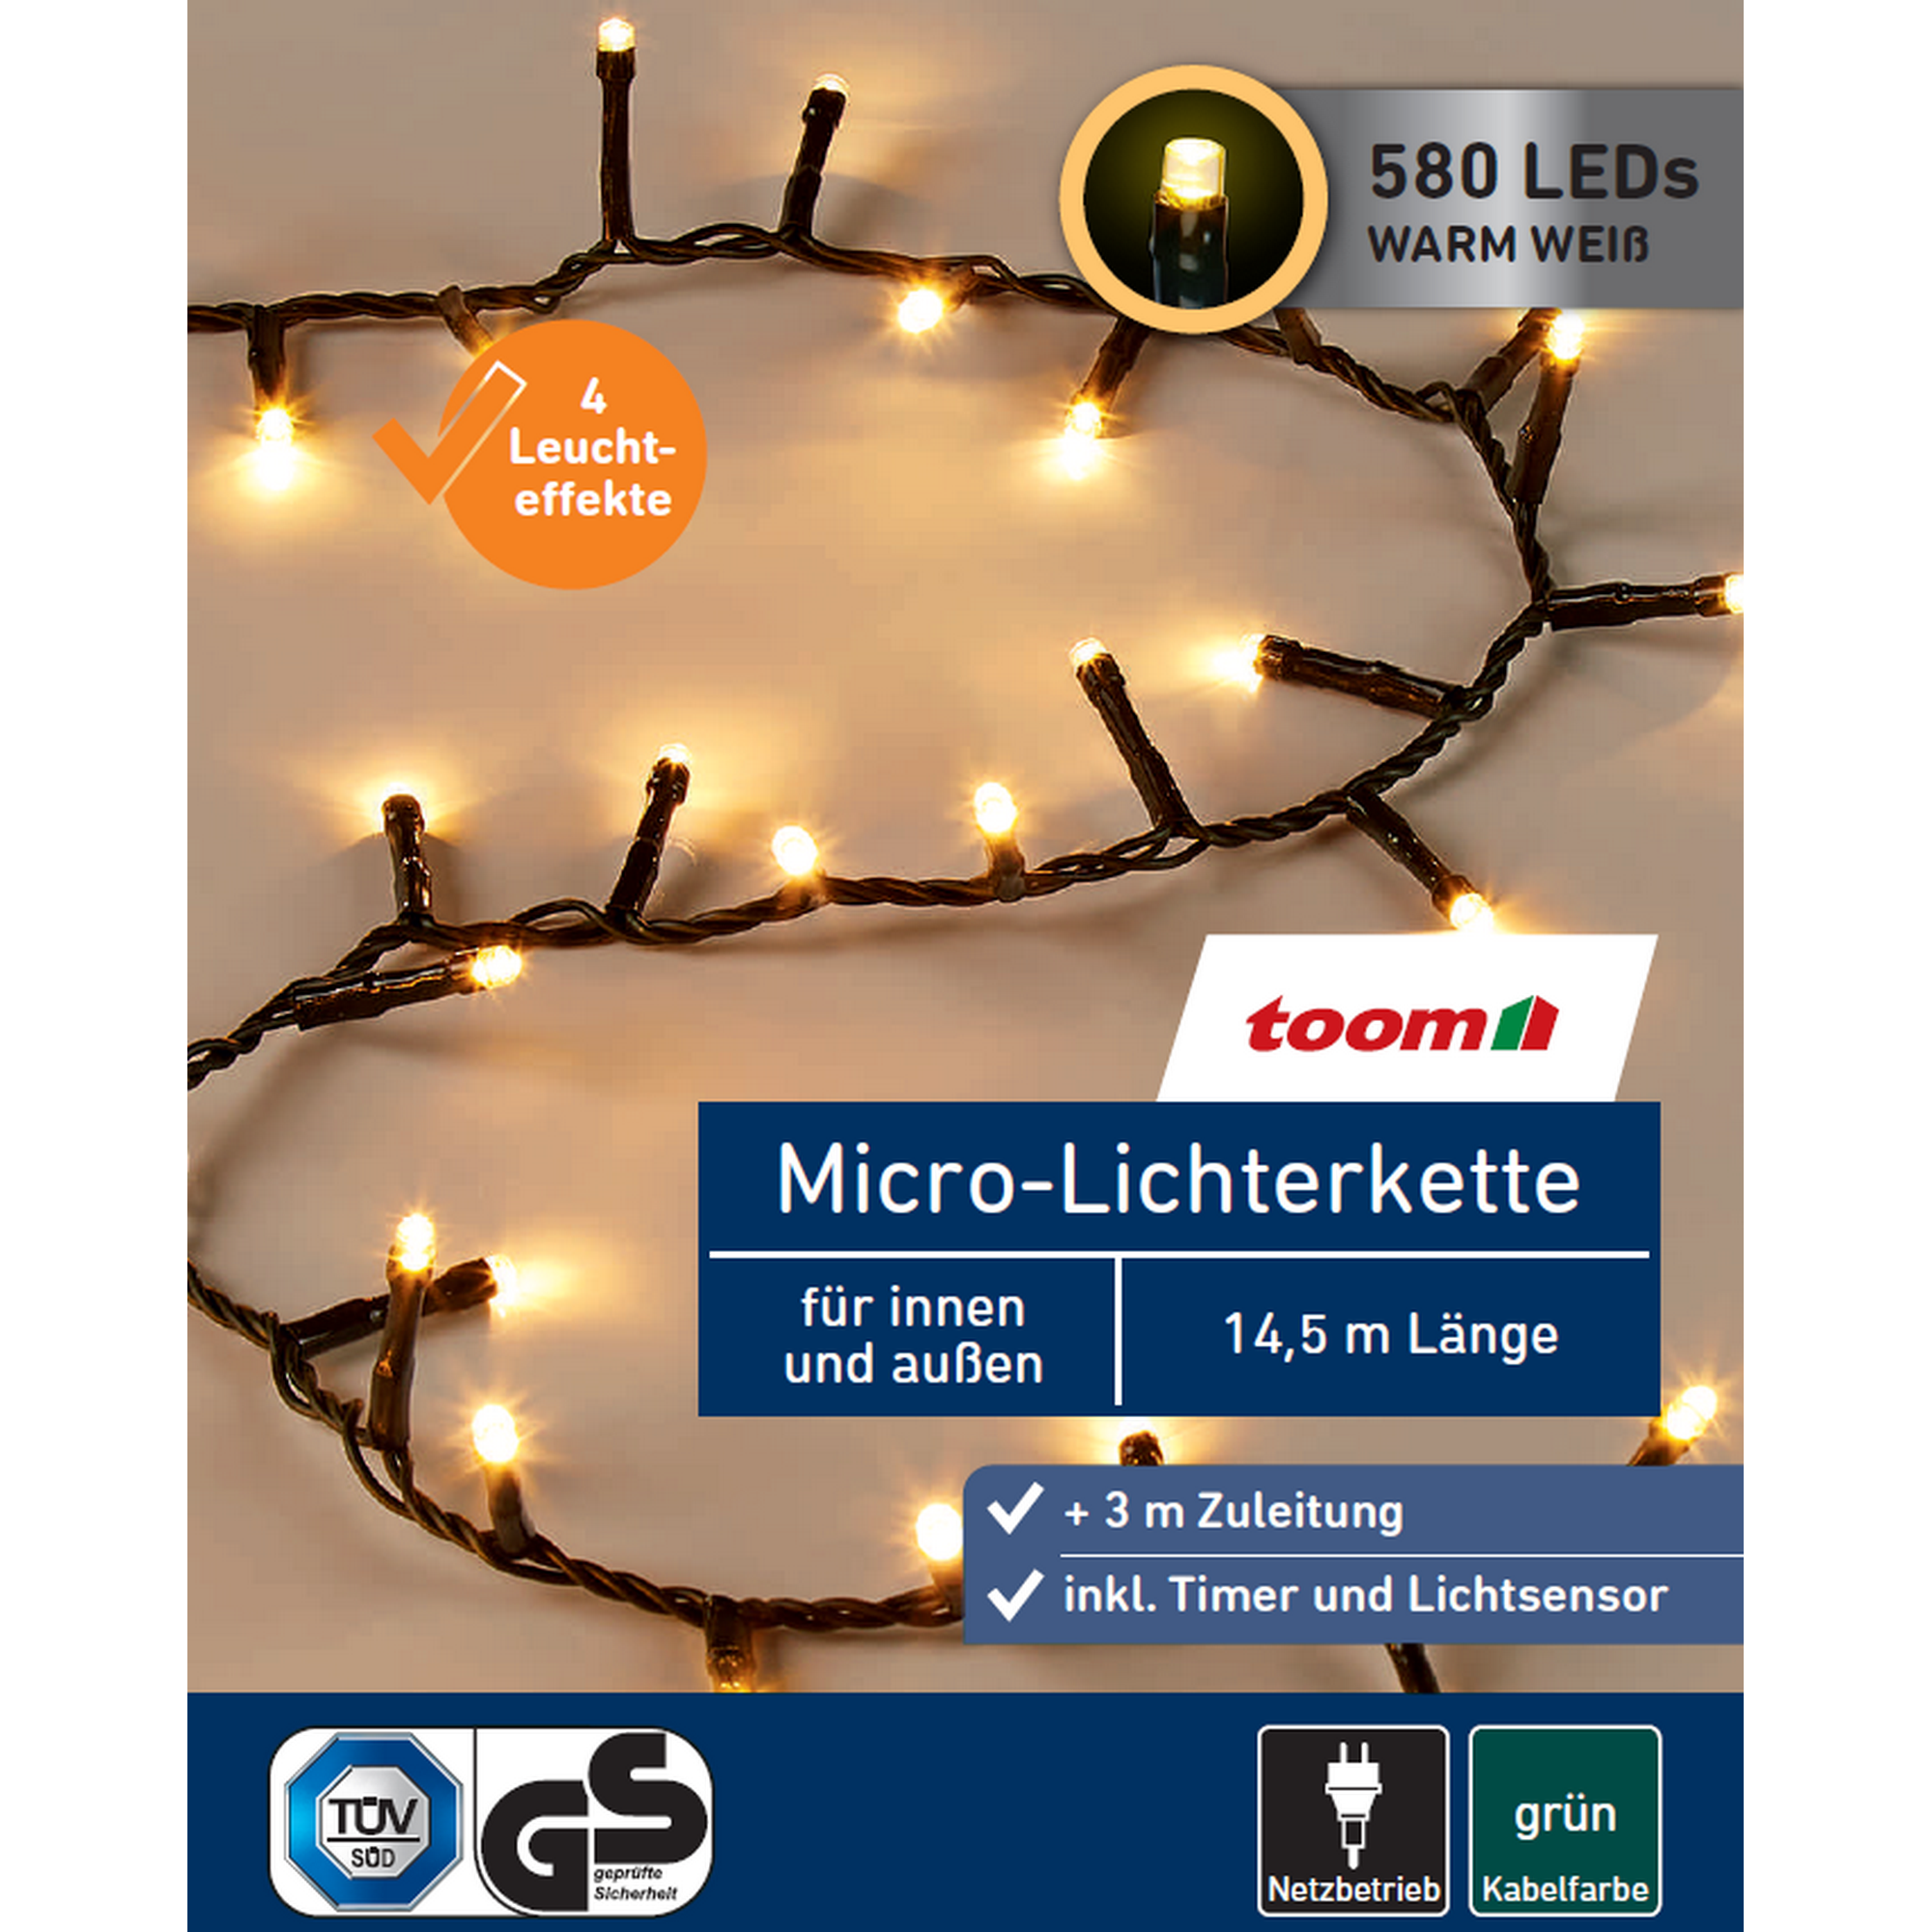 LED-Micro-Lichterkette 580 LEDs warmweiß 1450 cm + product picture